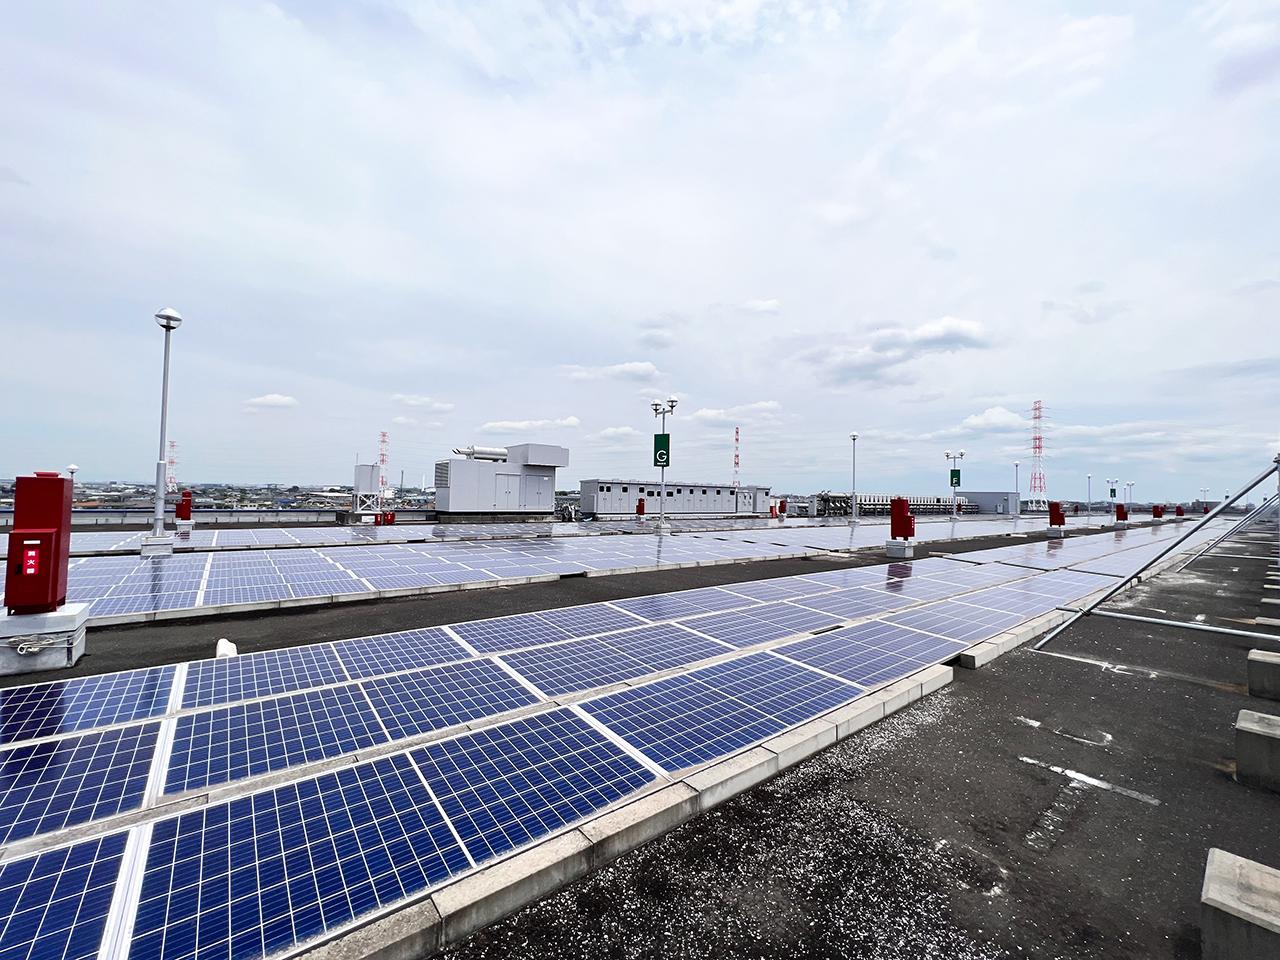 Since 2018, IKEA Japan has been operating all of its stores in Japan with 100% renewable electricity. At the Shinmisato store, a 380-kilowatt solar panel was installed on the roof. About 10% of the electricity required to operate the store is covered by in-house power generation, and the rest is purchased from 100% renewable energy.